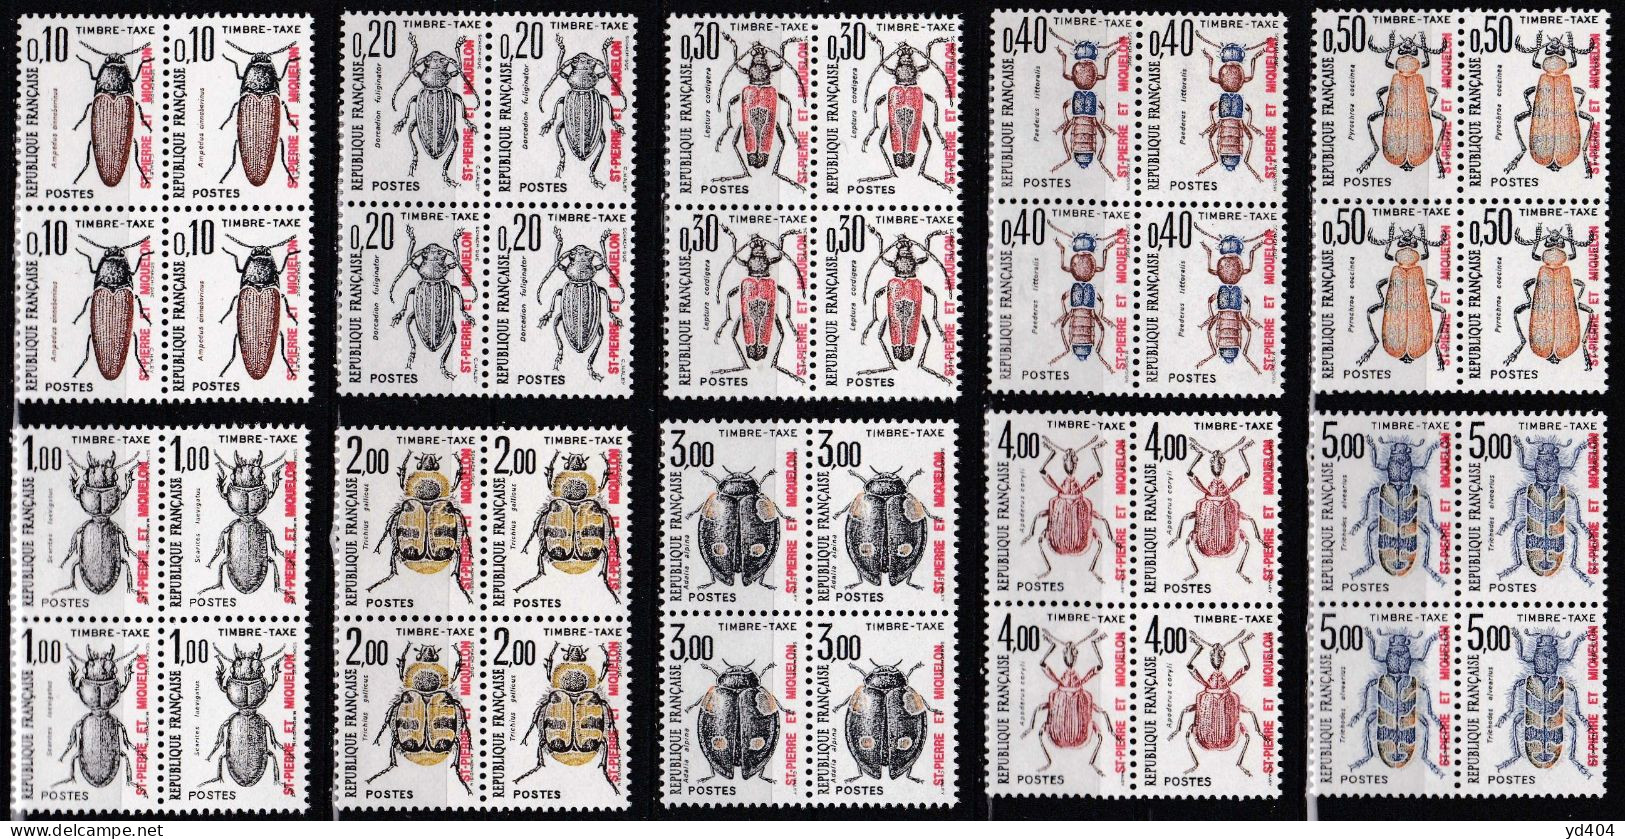 PM-660B – ST PIERRE & MIQUELON – POSTAGE DUE - 1986 – INSECTS – SG # D569/78(x4) MNH 106 € - Timbres-taxe